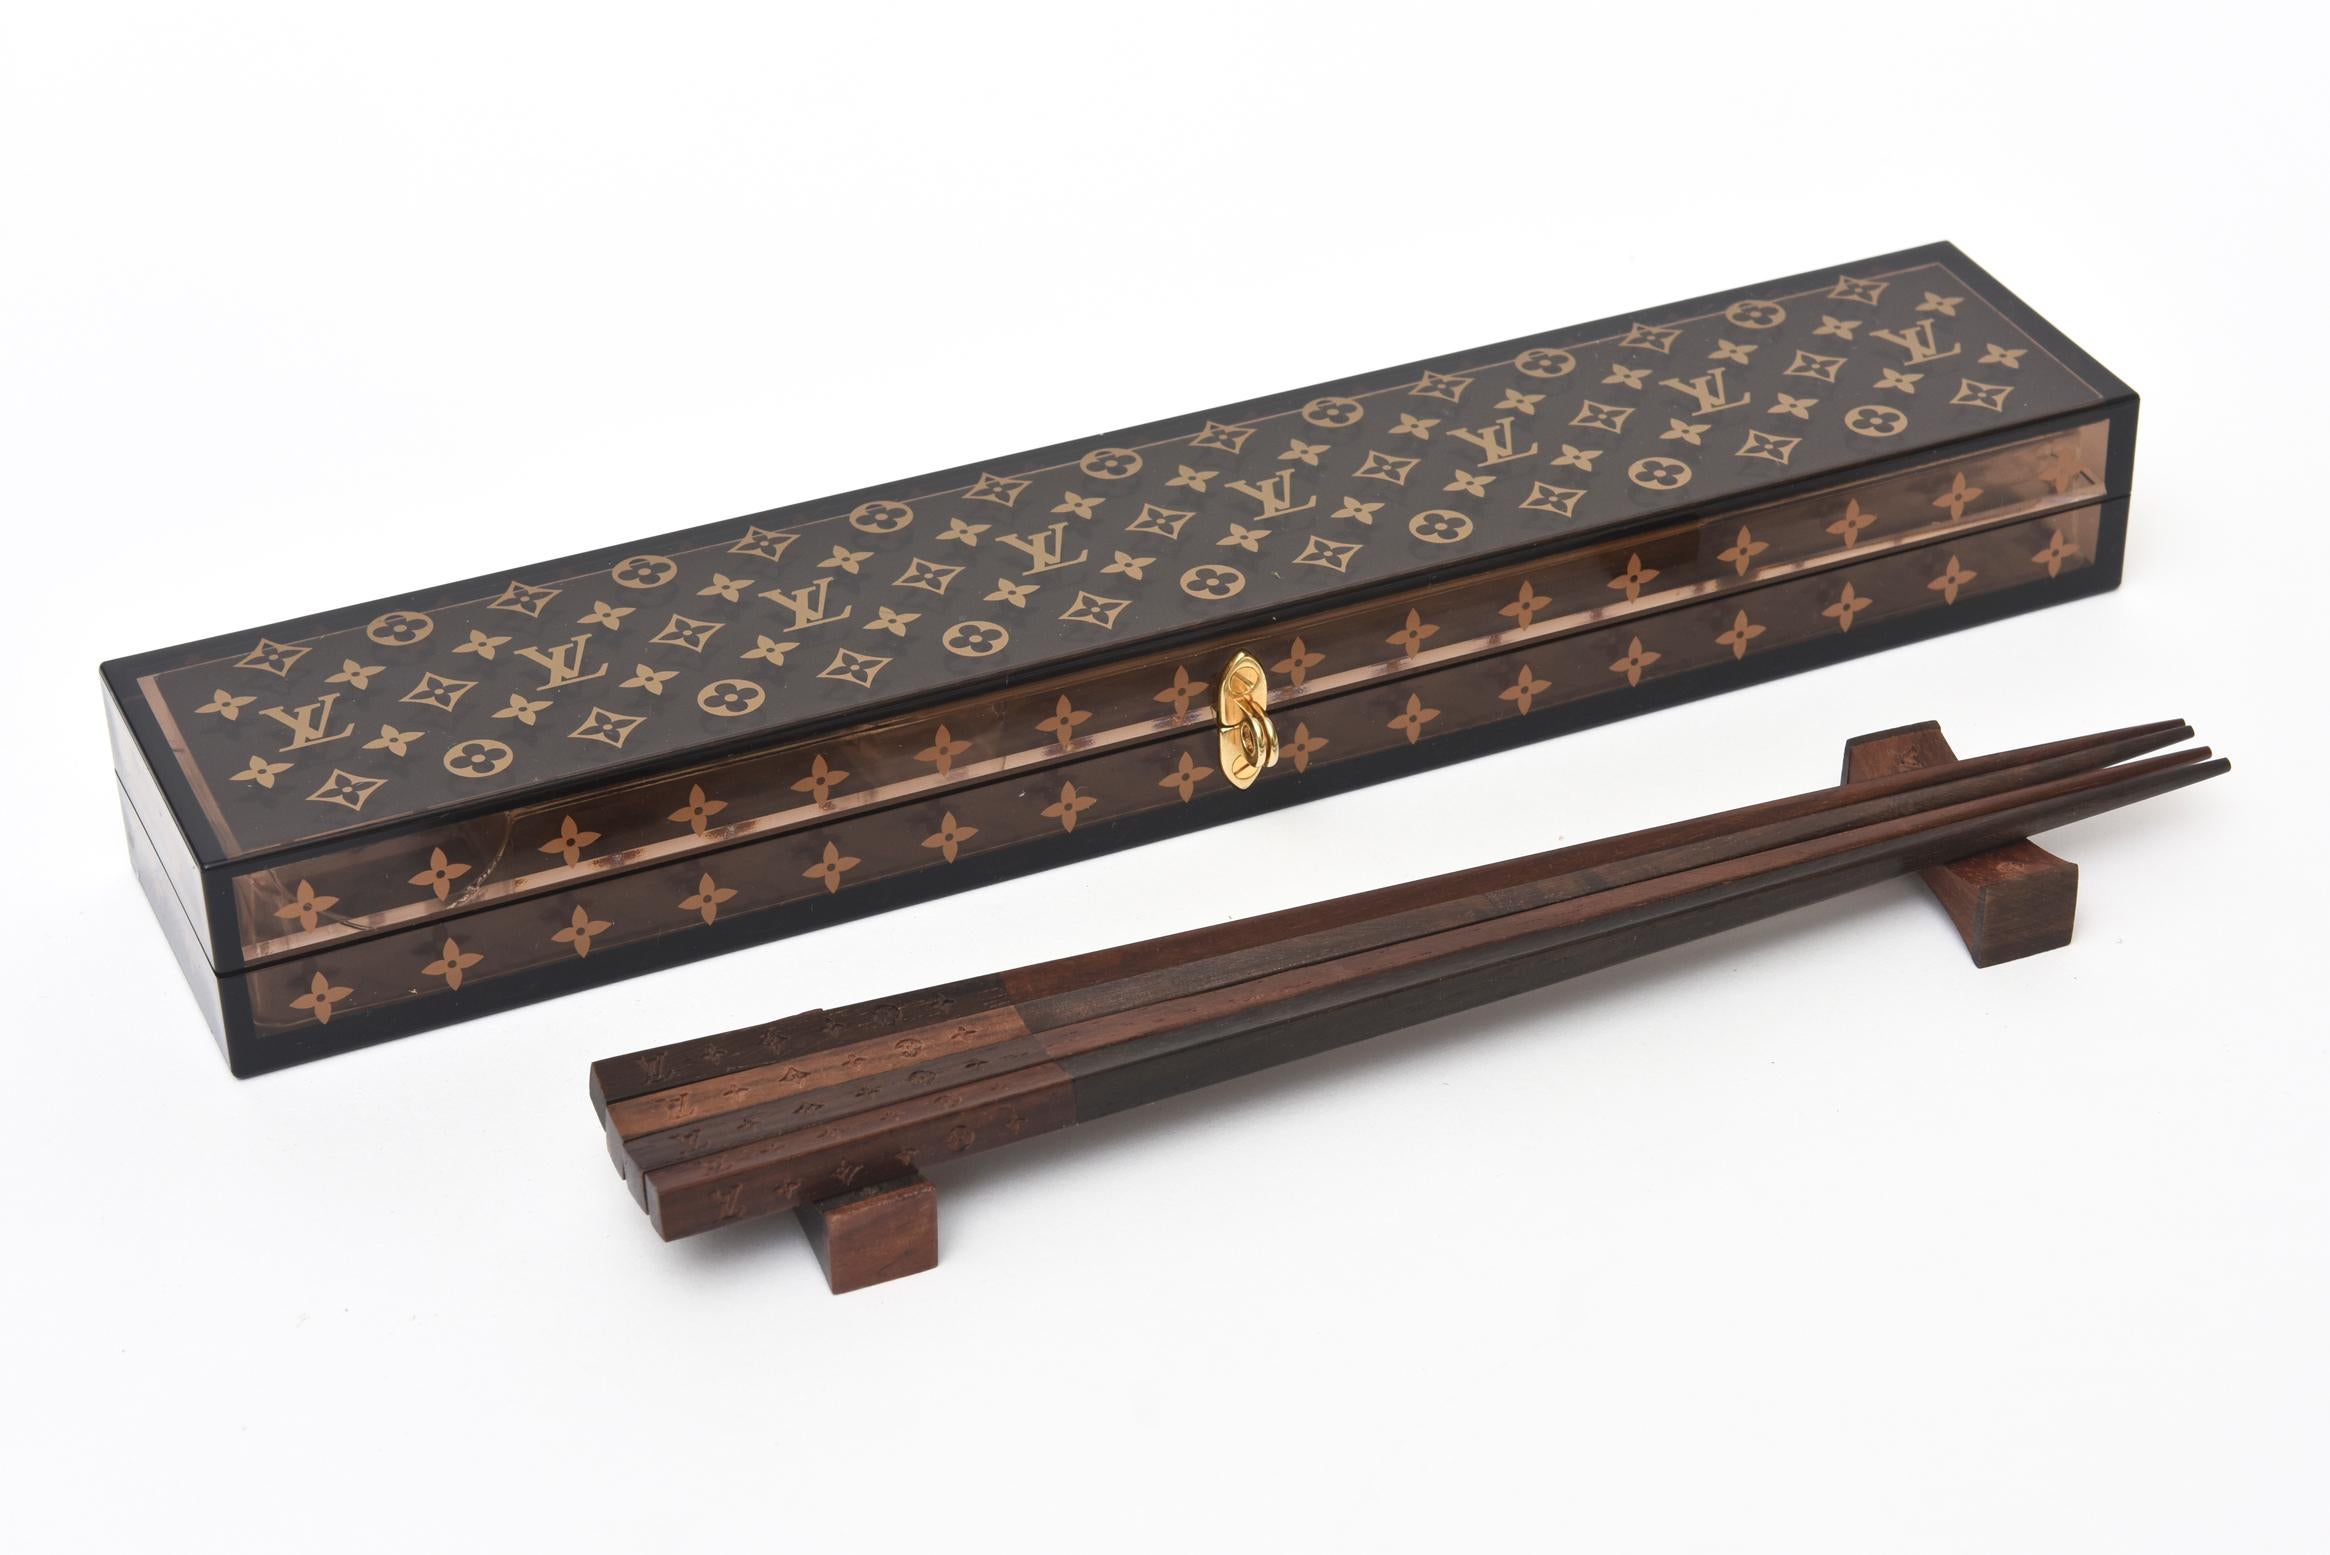 This amazing authentic limited edition Louis Vuitton set of a pair of chopsticks with its monogrammed plastic case is from 2012. These have been since discontinued. The pair of chopsticks are monogrammed with the LV at the ends are in two different